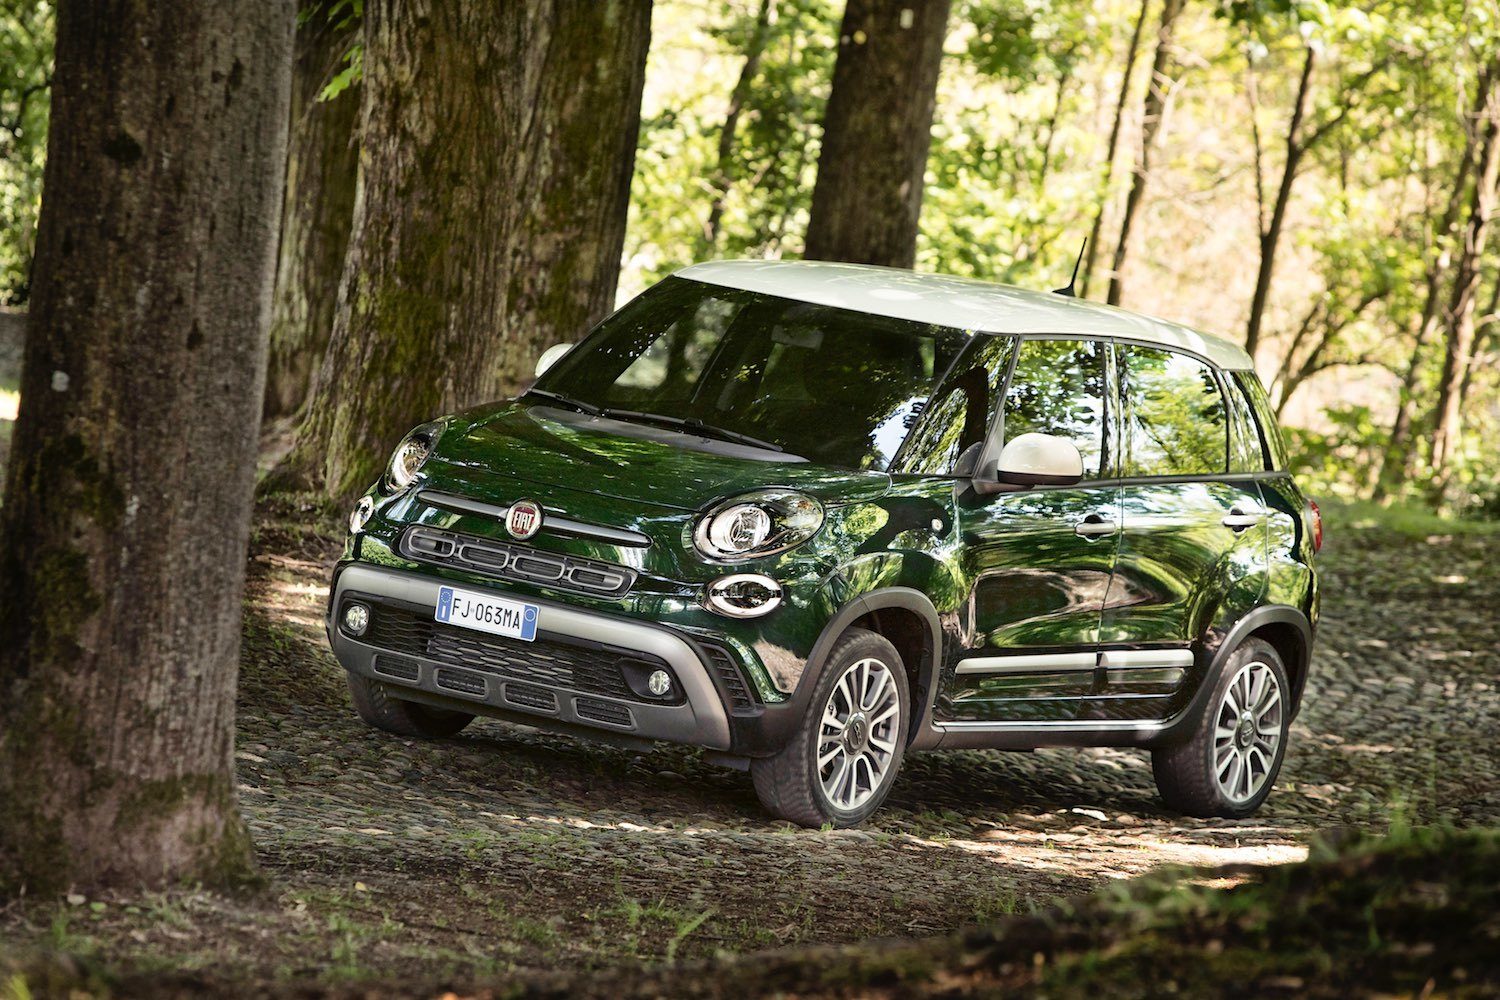 Tim Barnes-Clay reviews the New Fiat 500L from the first drive in Italy 14